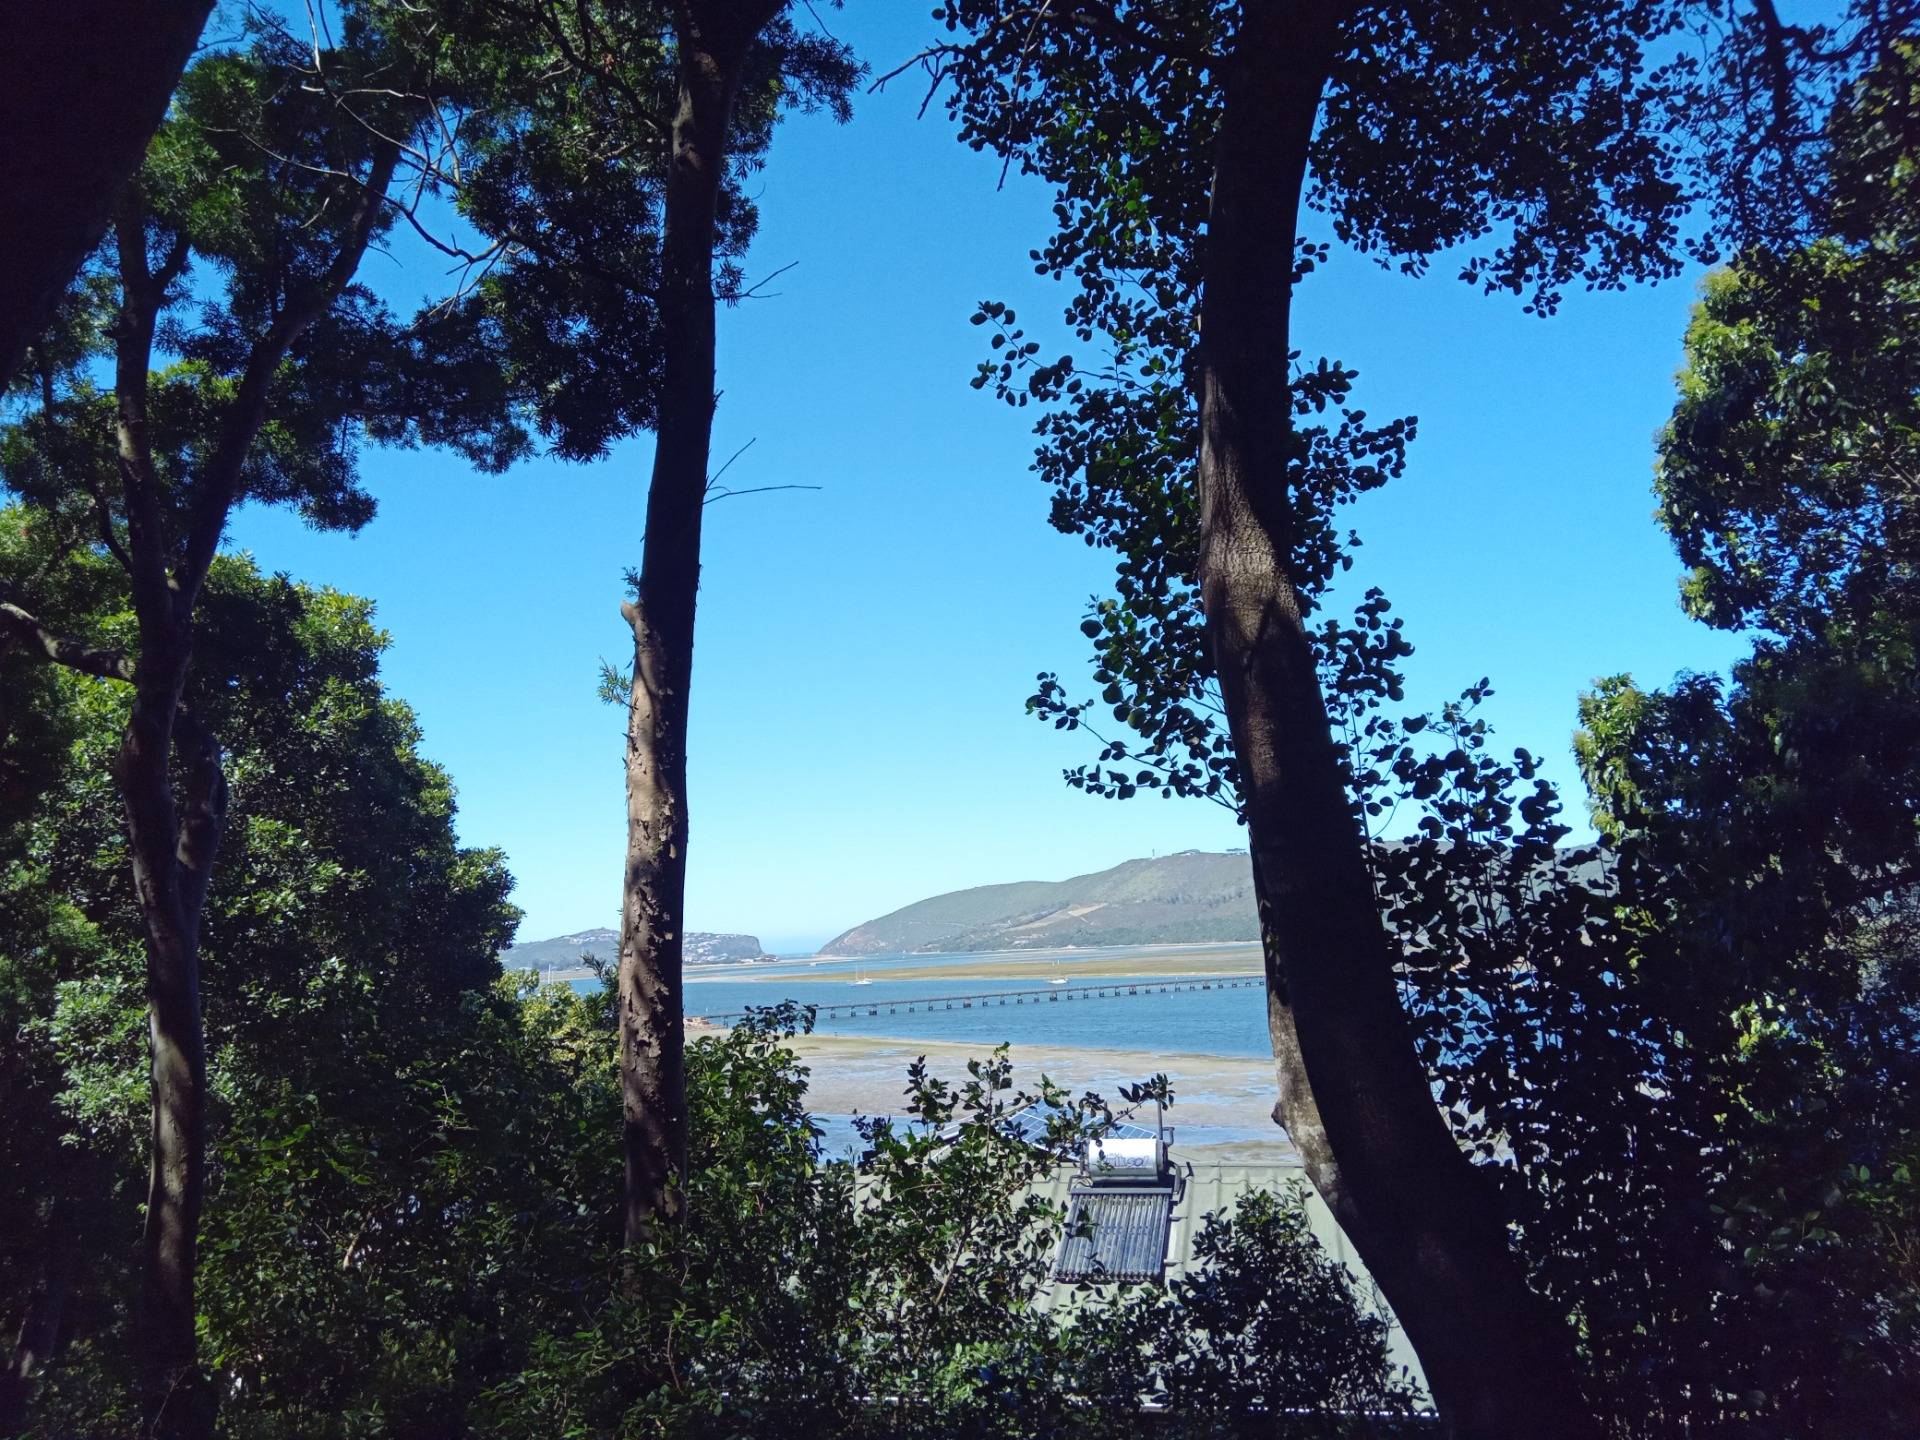 A glimpse of the Knysna lagoon through some of the indigenous trees in this lush first region, with the Heads just visible in the distance, leading out to the Indian Ocean. Sunny South Africa uses a lot of solar power to supplement the less than optimal national electricity grid